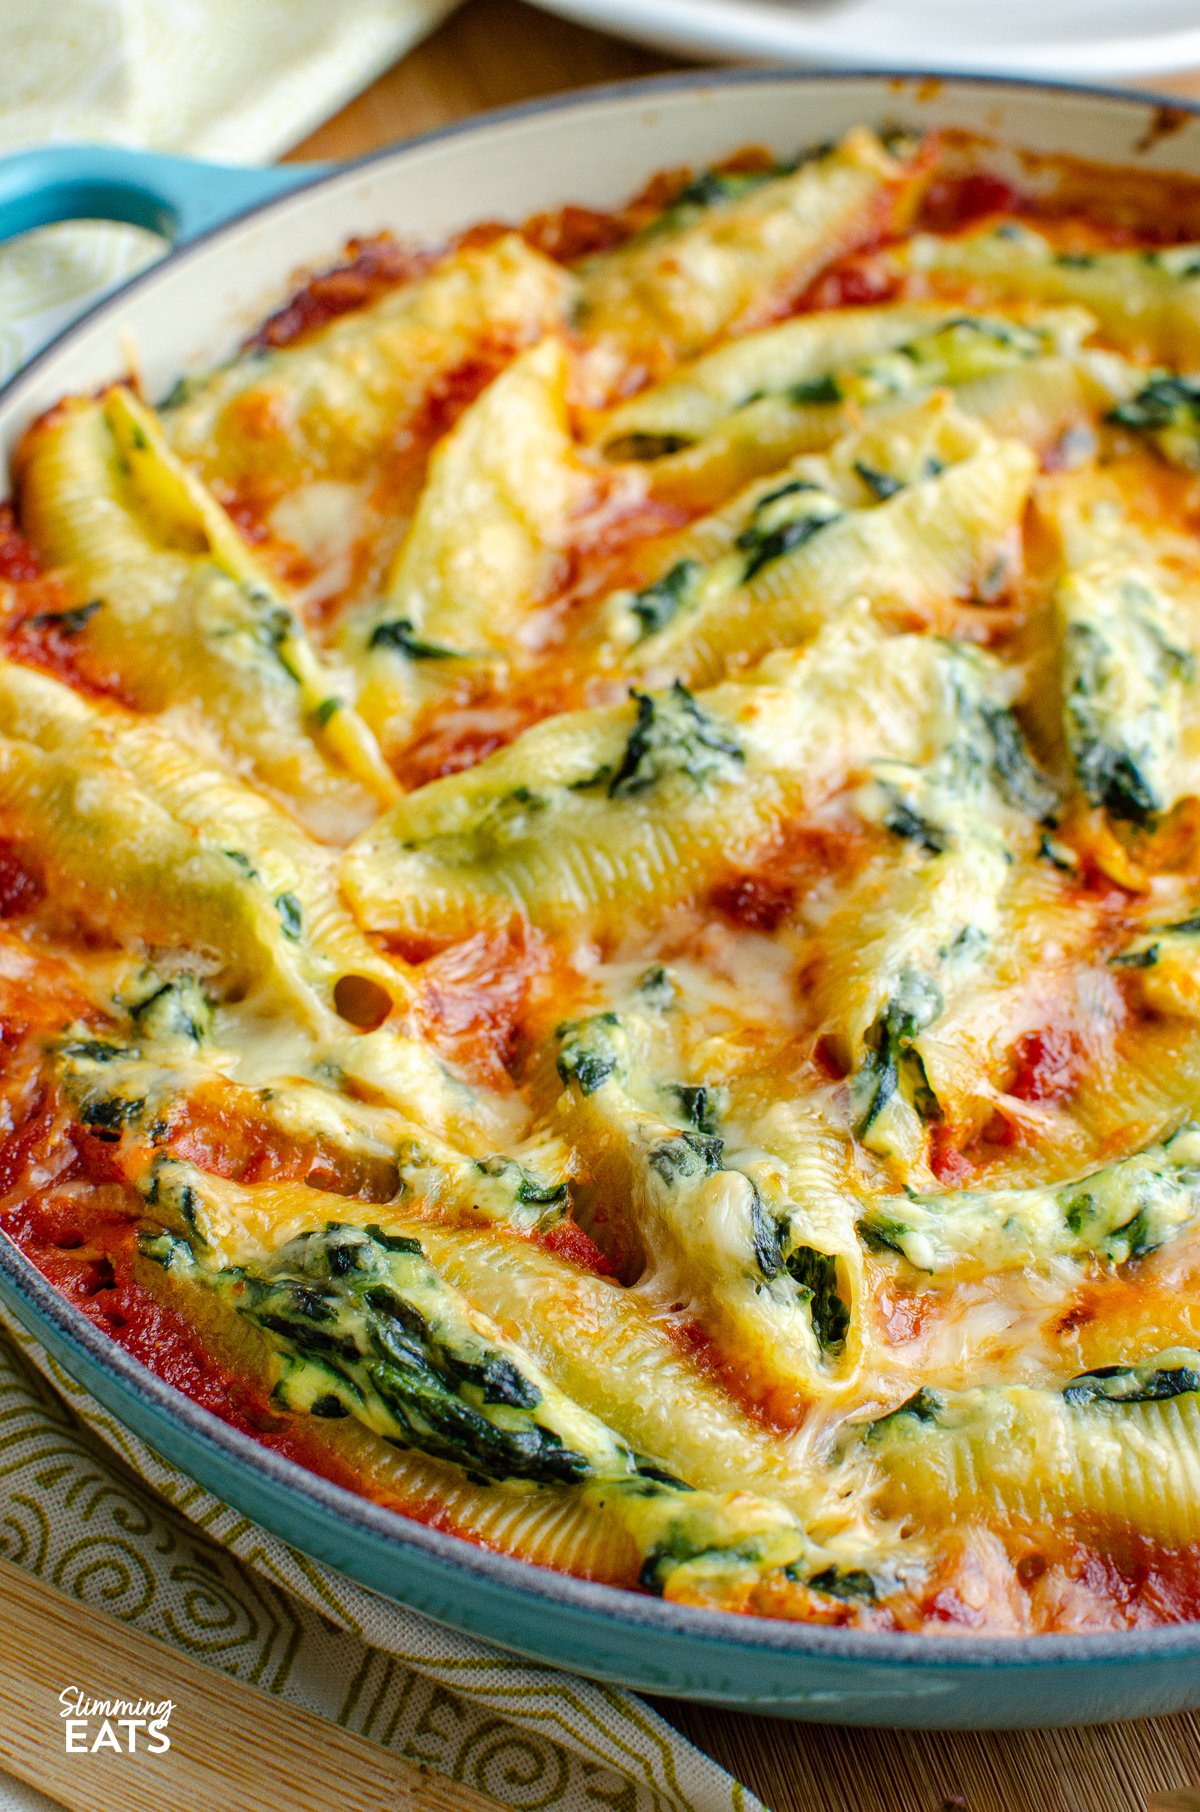 Ricotta and Spinach Stuffed Pasta Shells presented in a turquoise cast iron pan, accompanied by a wooden spoon.